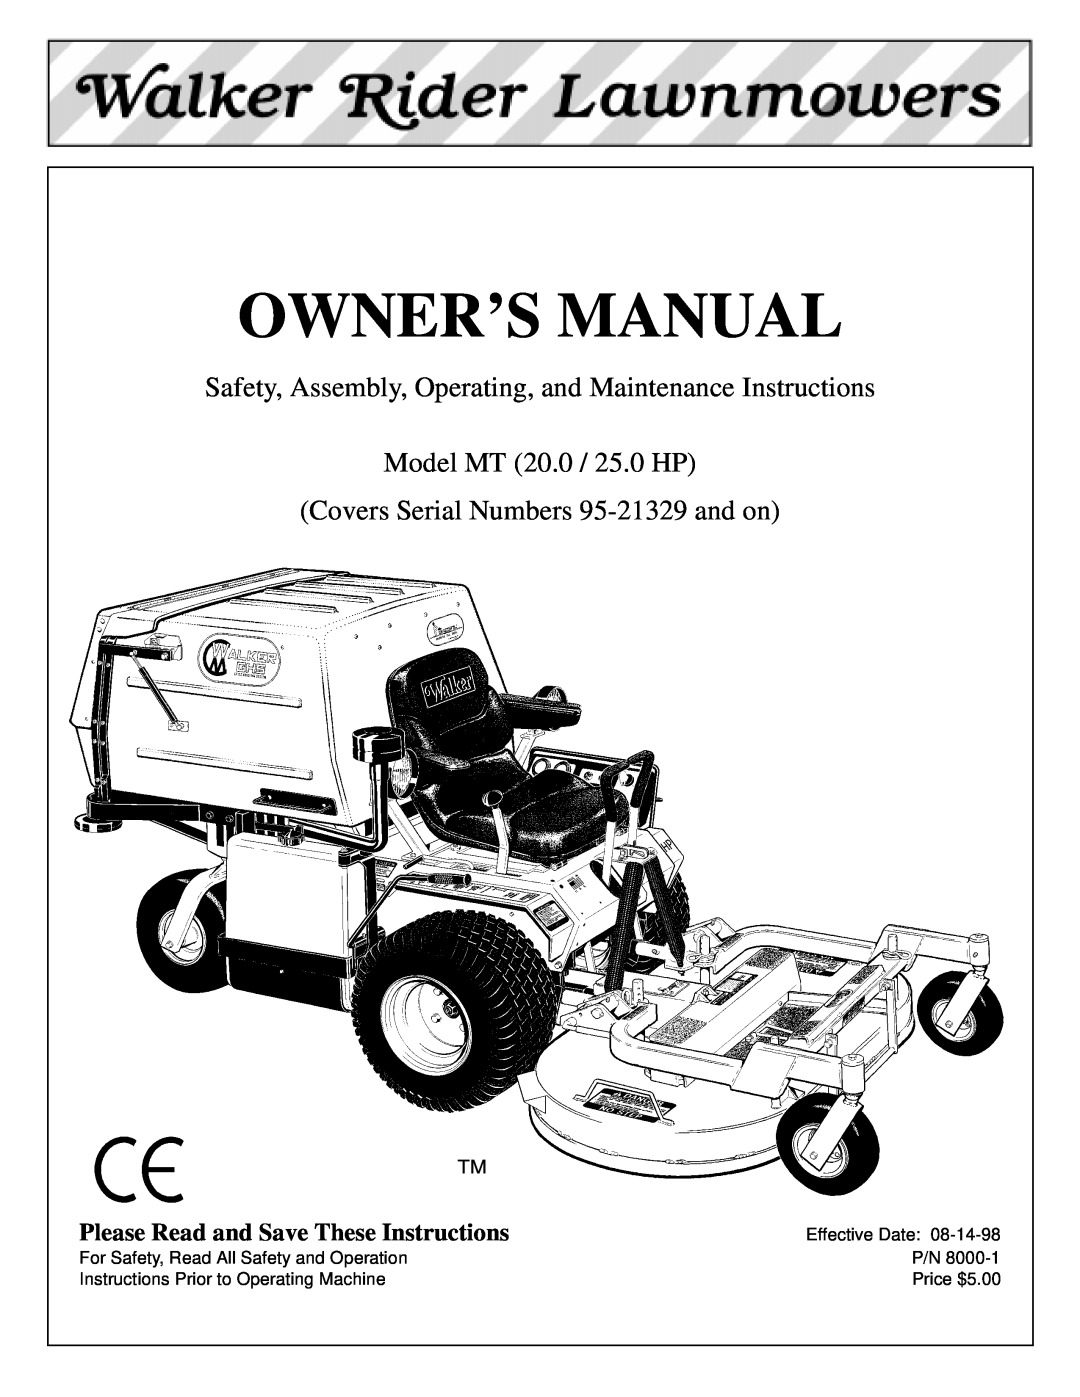 Walker MT owner manual Please Read and Save These Instructions, Owner’S Manual 